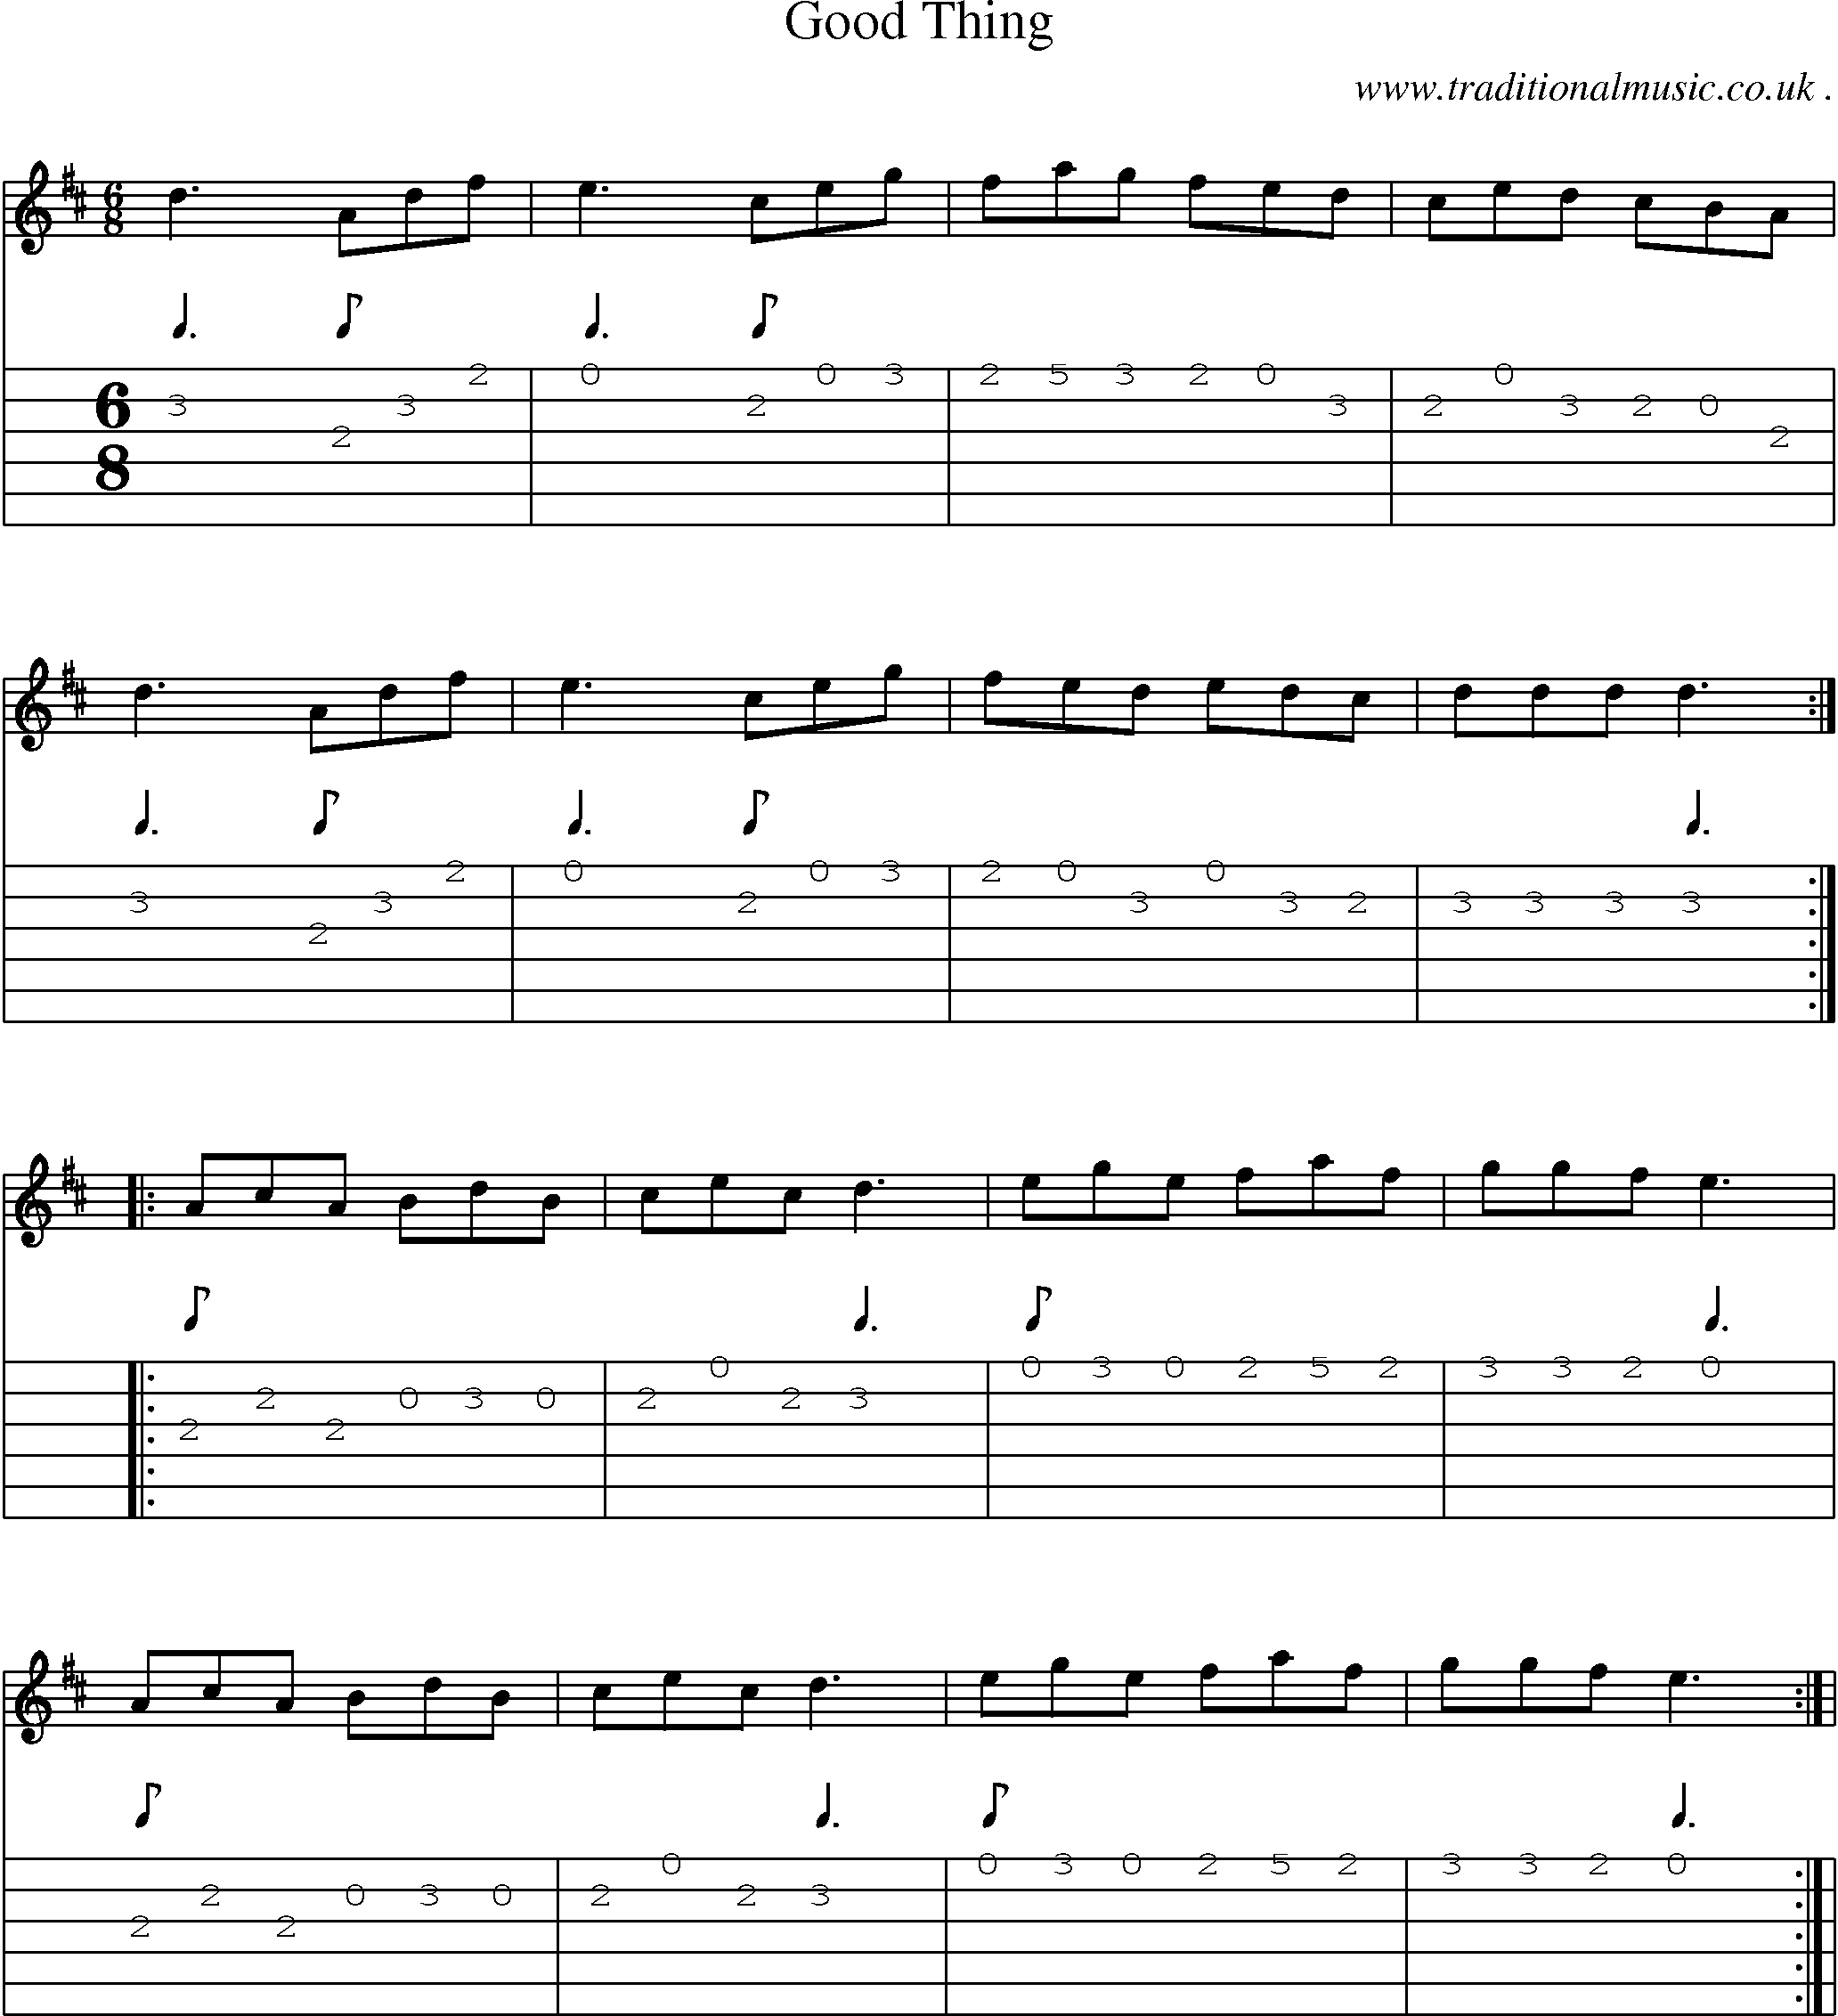 Sheet-Music and Guitar Tabs for Good Thing